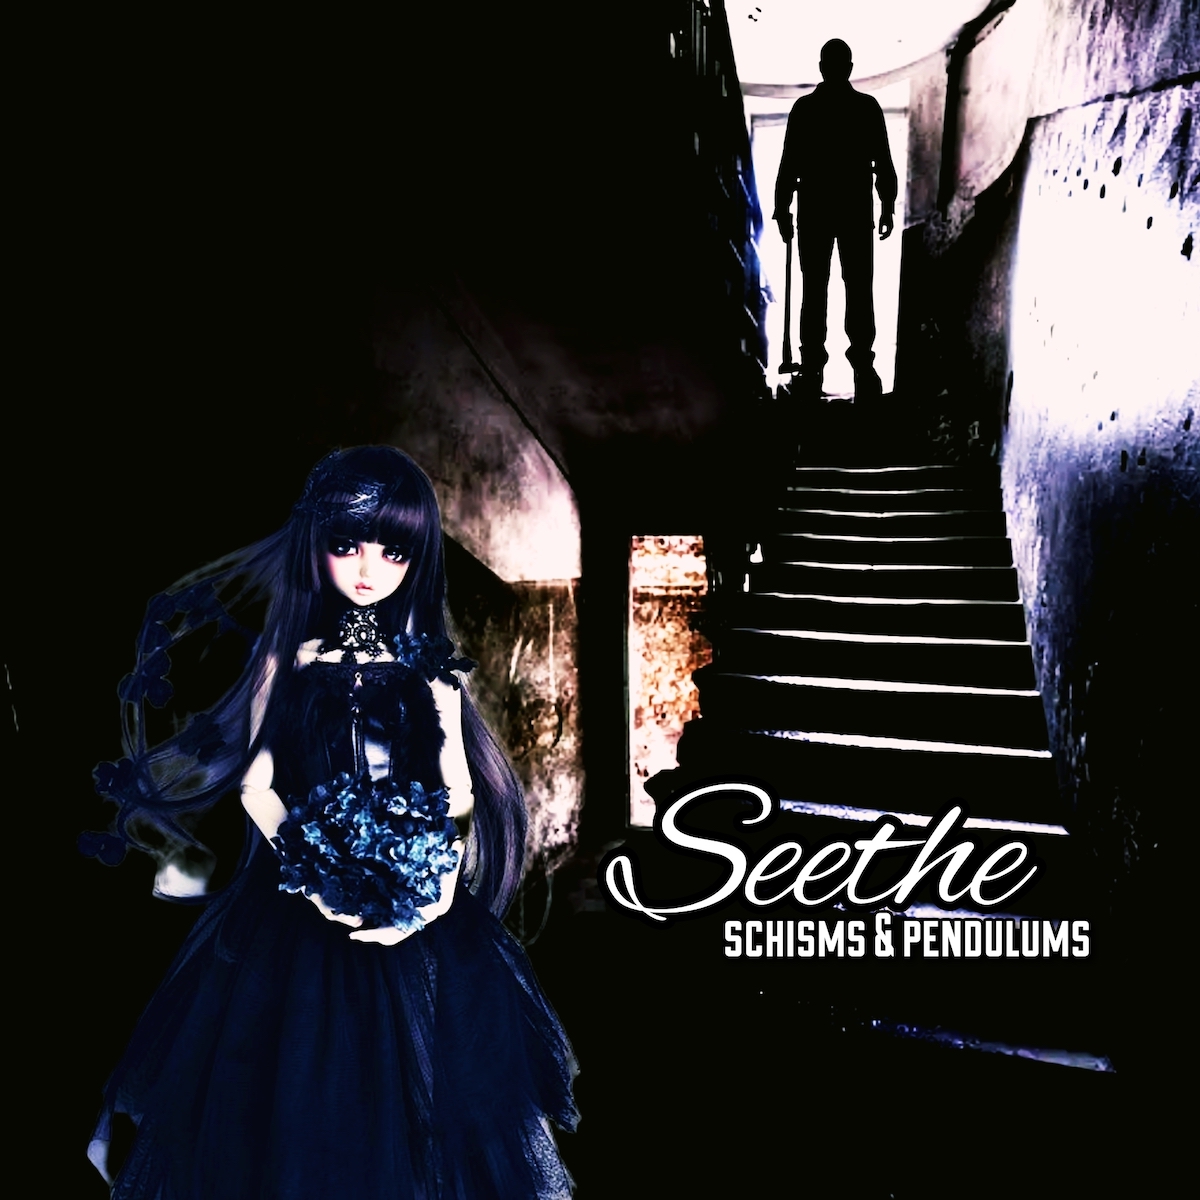 EP REVIEW: Schisms & Pendulums by Seethe